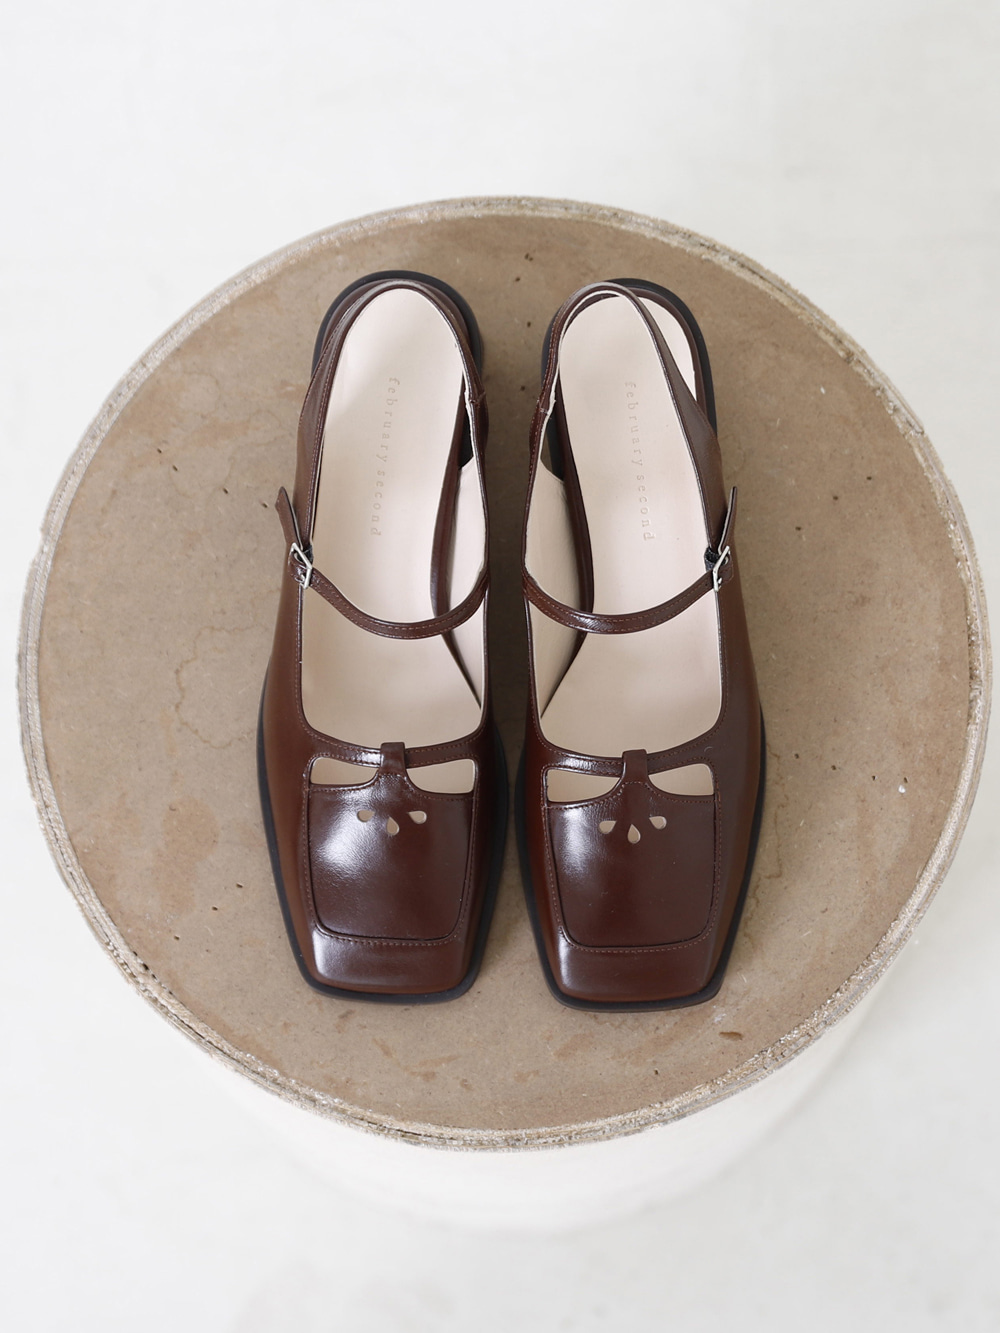 Square mary janes   Brown